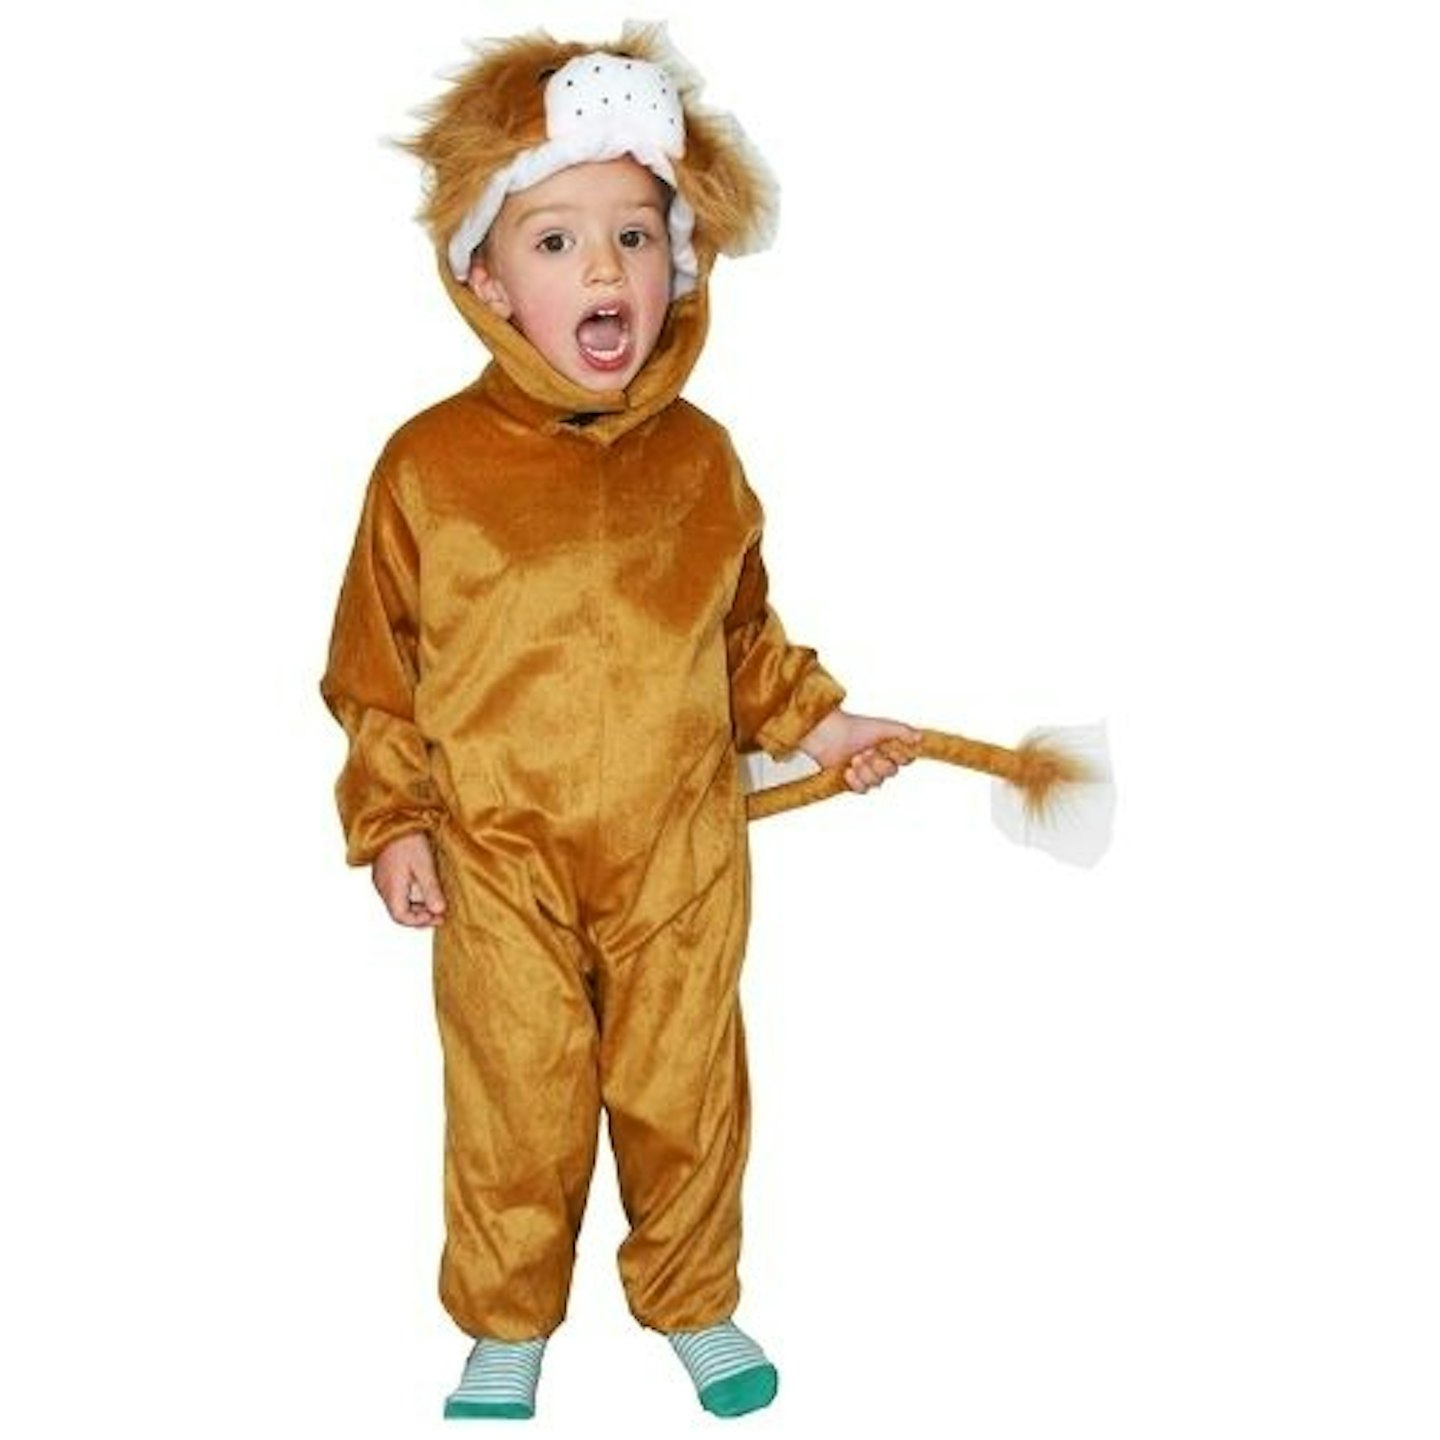 Fun Play Lion Costume for Kids